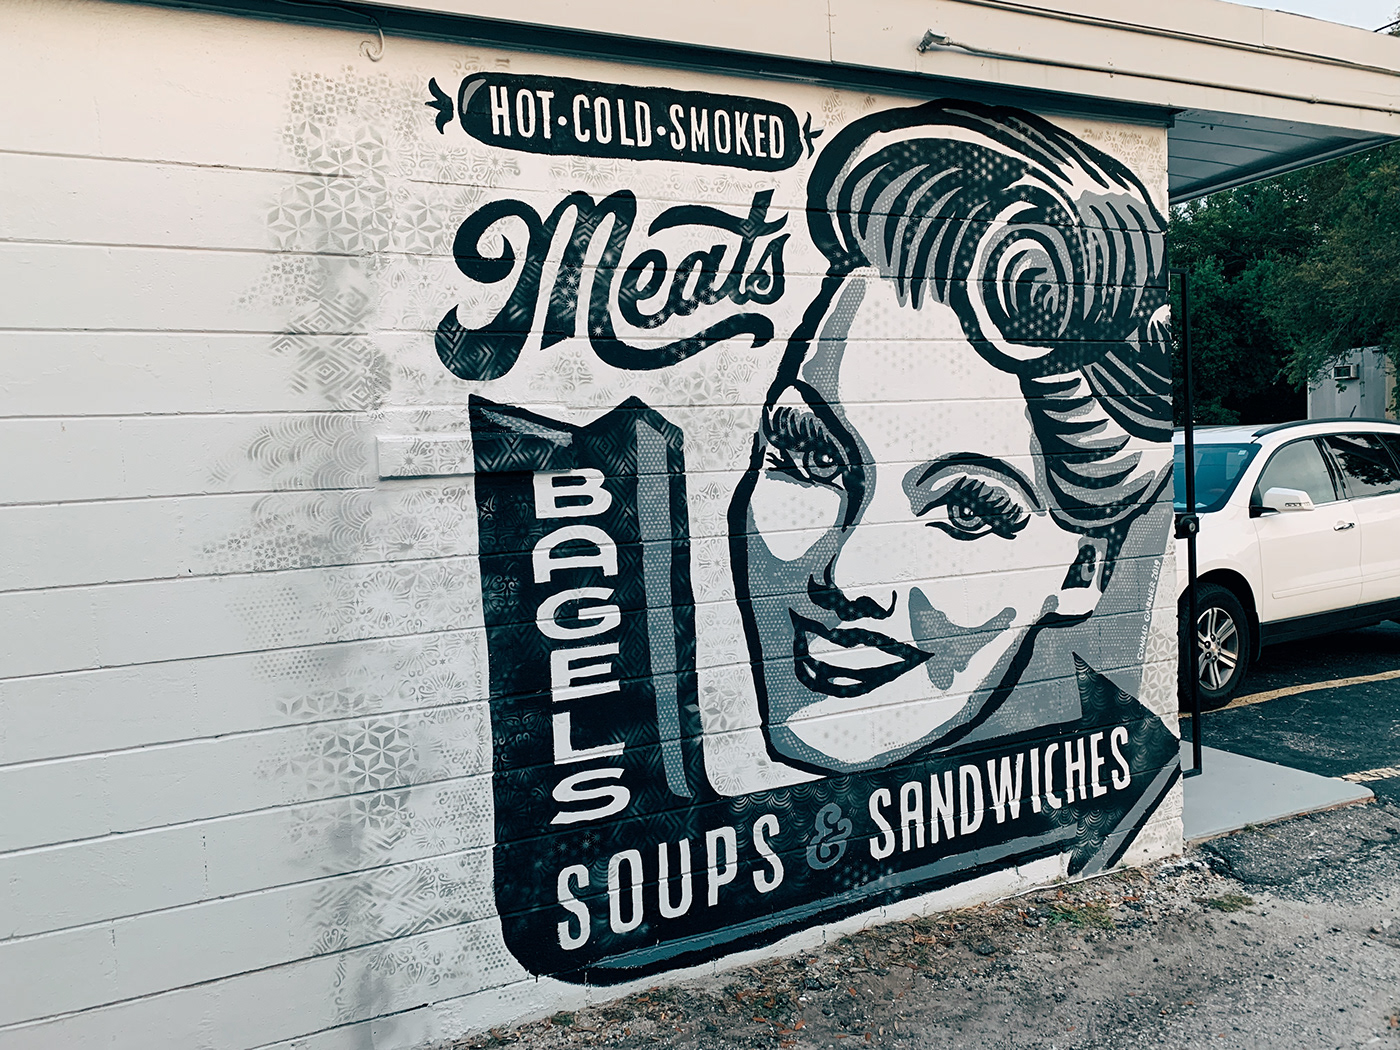 vintage deli texture Mural smoked meats cass street deli tampa florida Classic grayscale